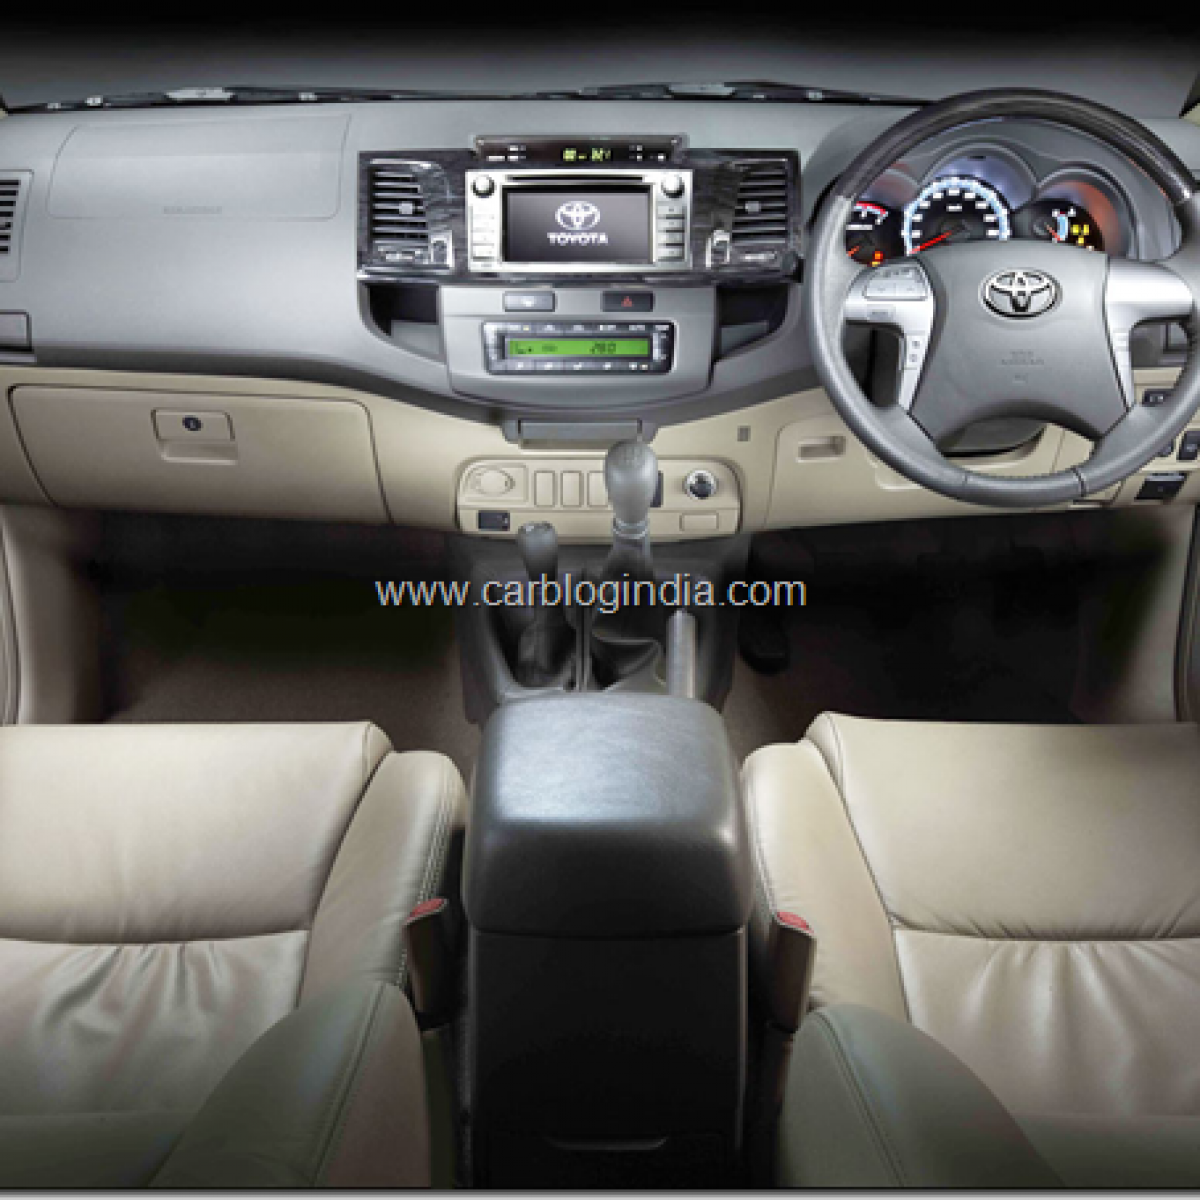 New Model Toyota Fortuner 2012 India Price List Pictures